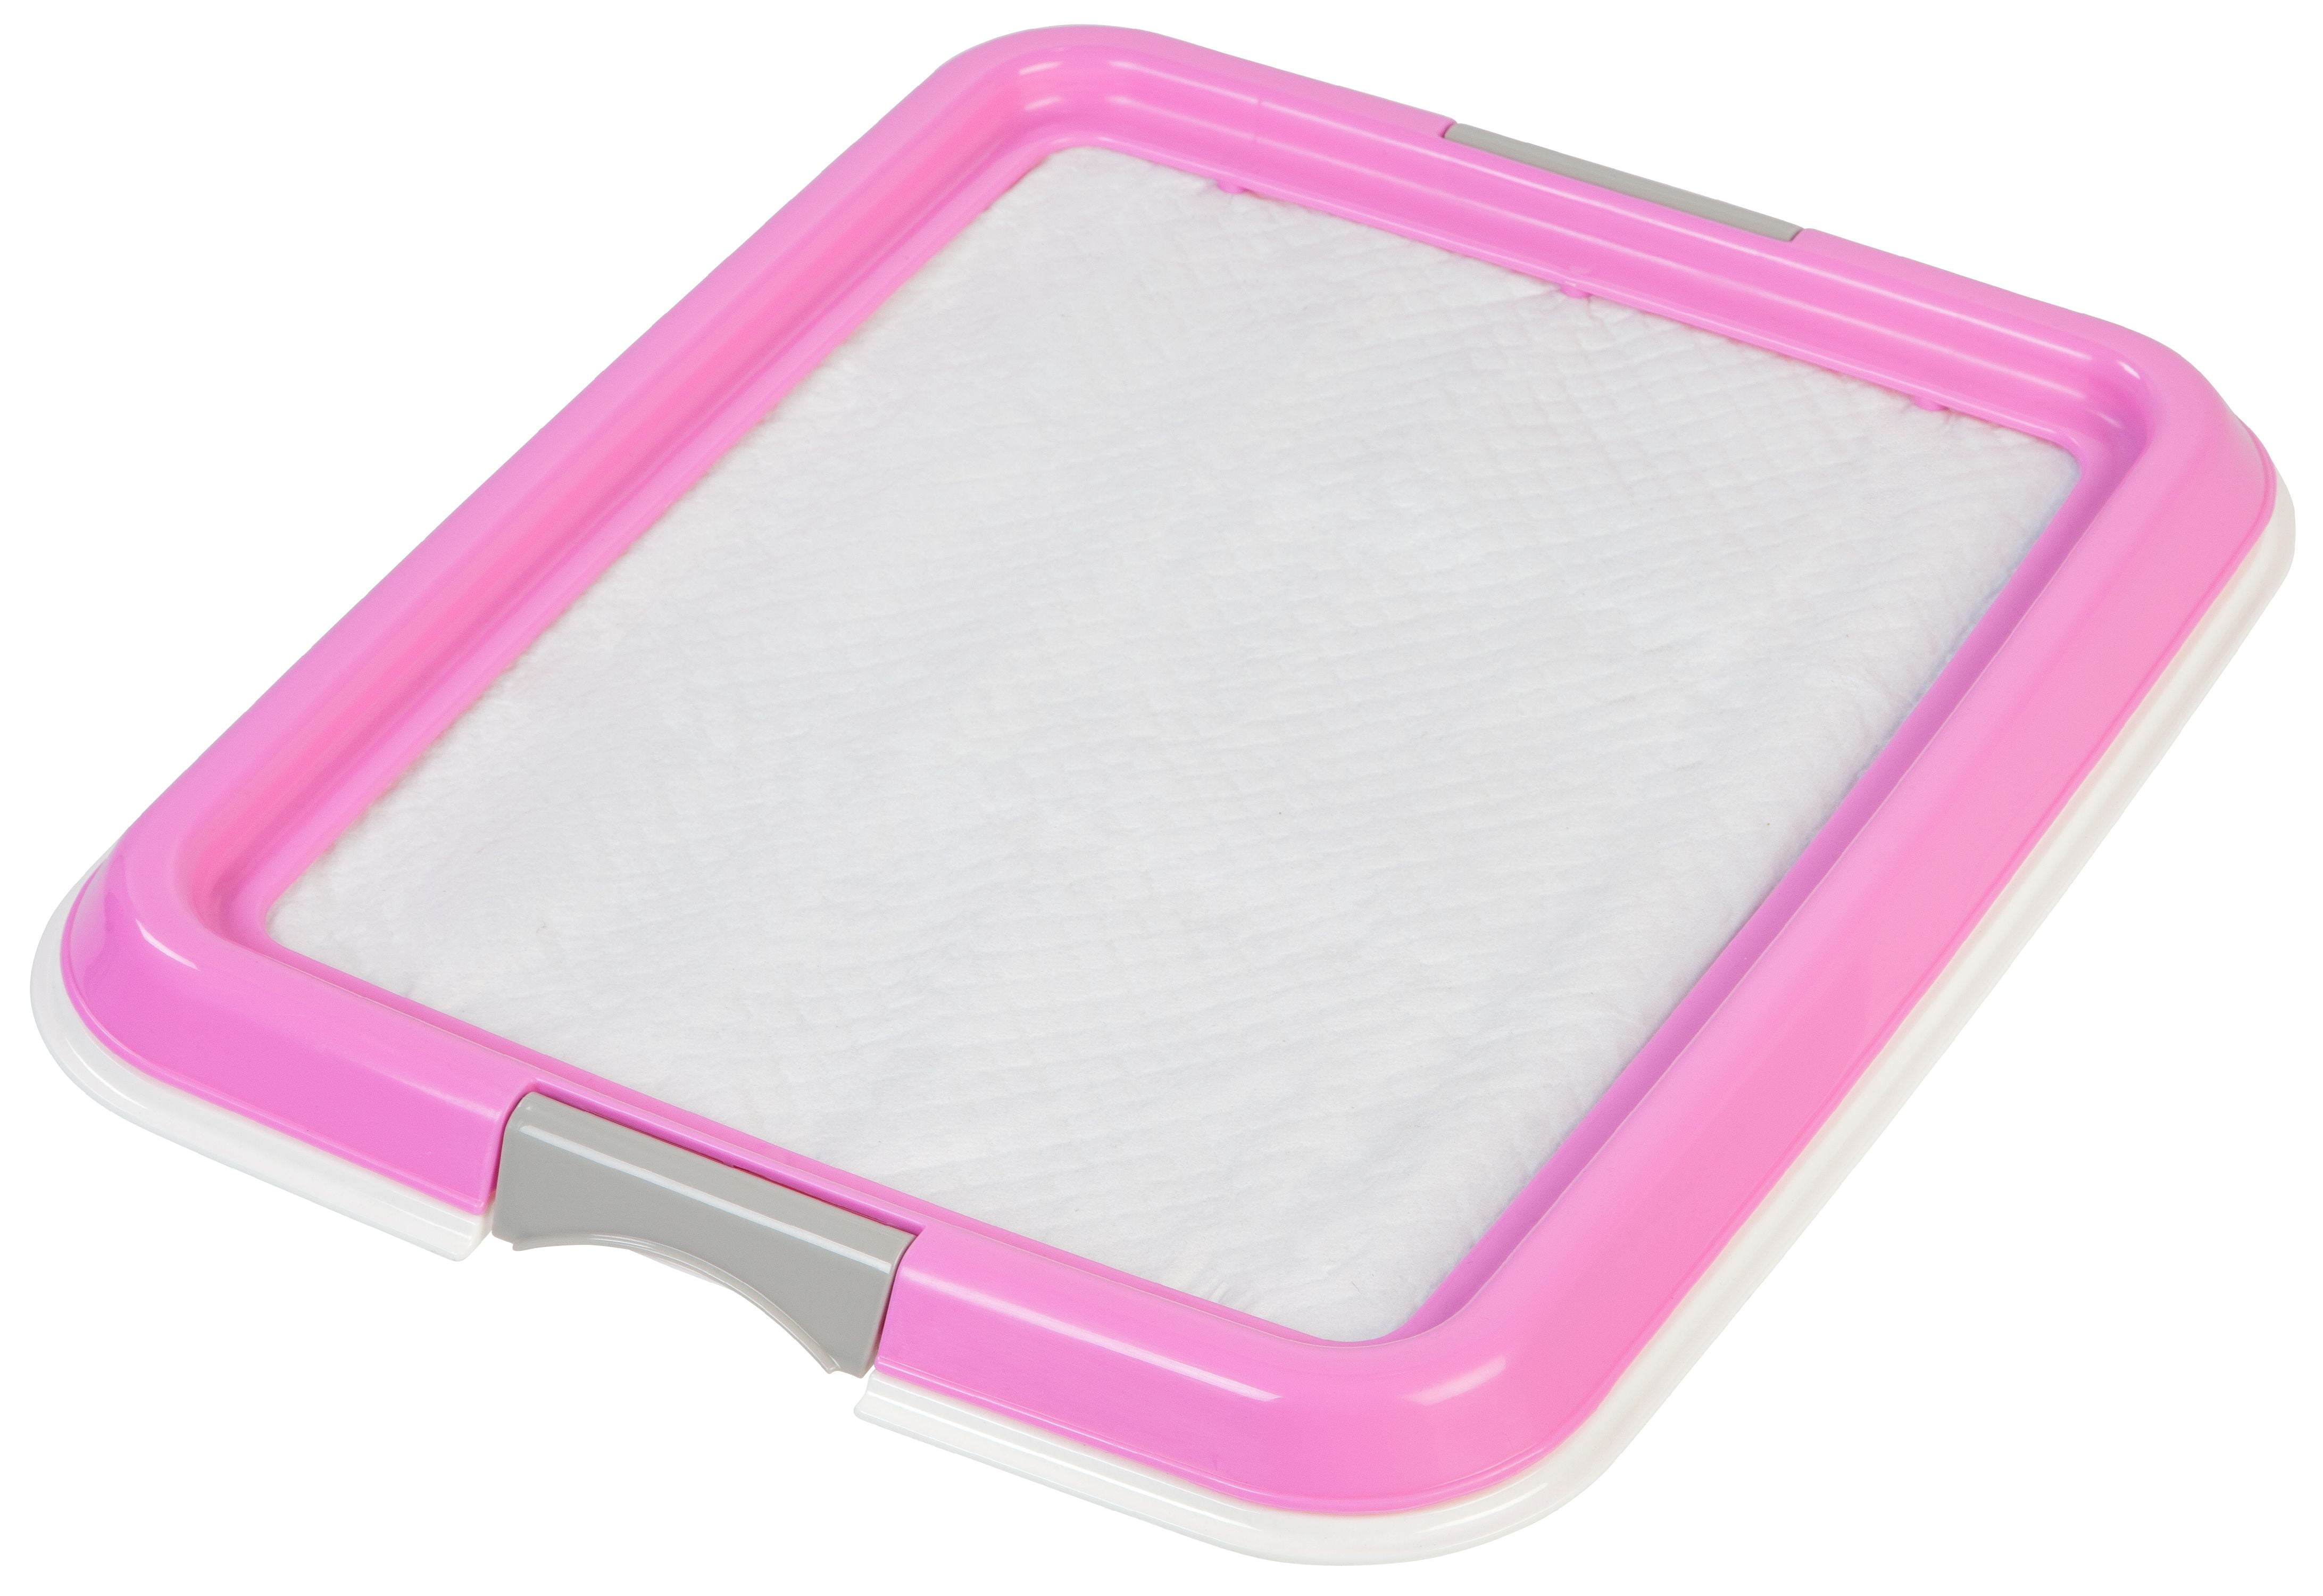  Gadpiparty Pet Toilet Wee Pads for Dogs Pee Pad Holder Pet  Training Puppy Indoor Dog Toilet Tray Puppy Pad Holder Tray with Grate  Puppy Sit Pad Puppy Training Pads Pink